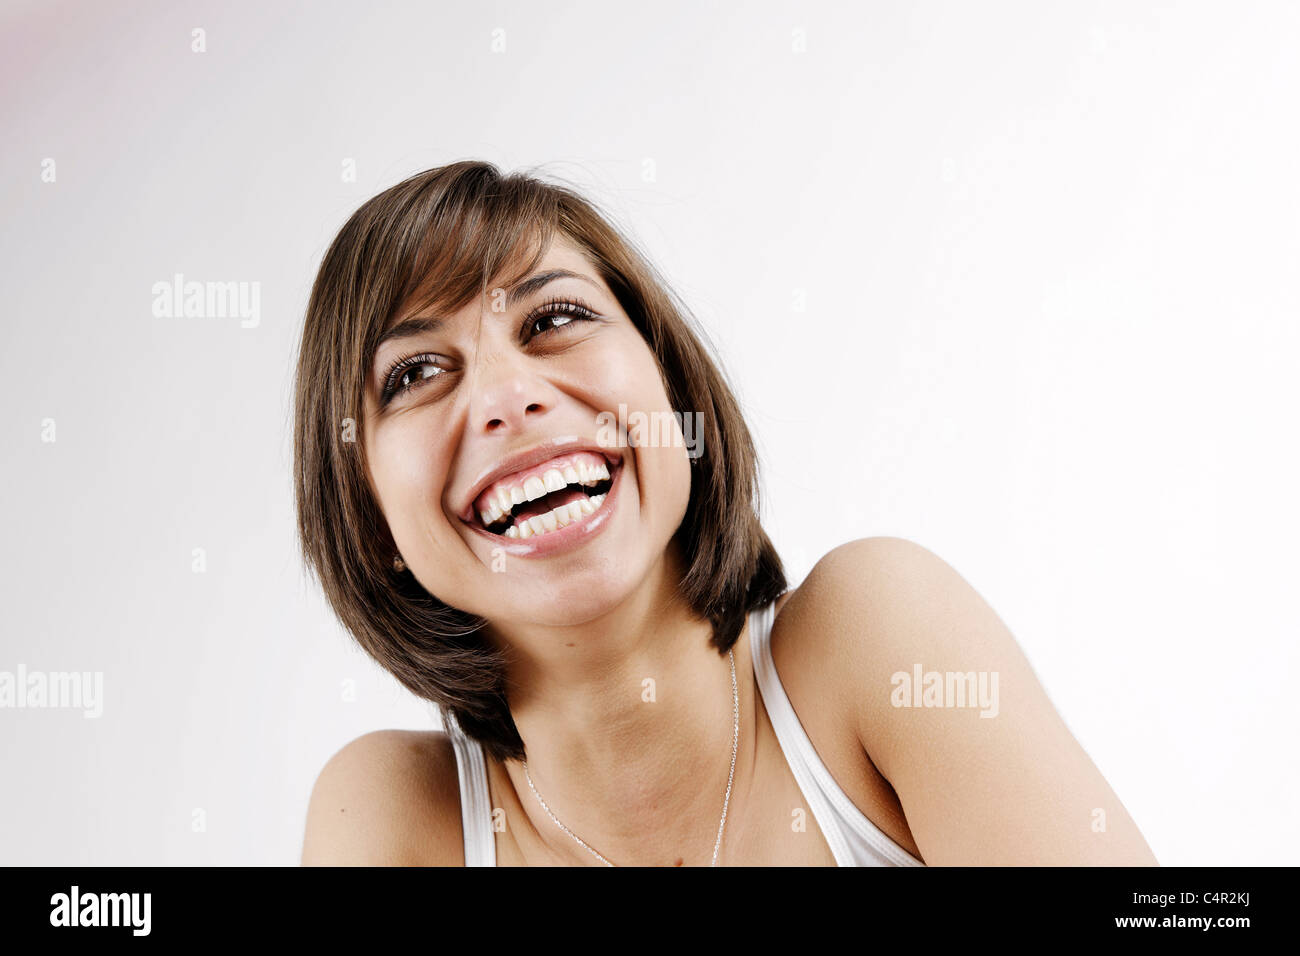 Young brunette woman, 25 years, laughing, having fun, full of joy - Junge Frau, braunhaarig, 25, lacht, lachend, Spaß, Freude Stock Photo